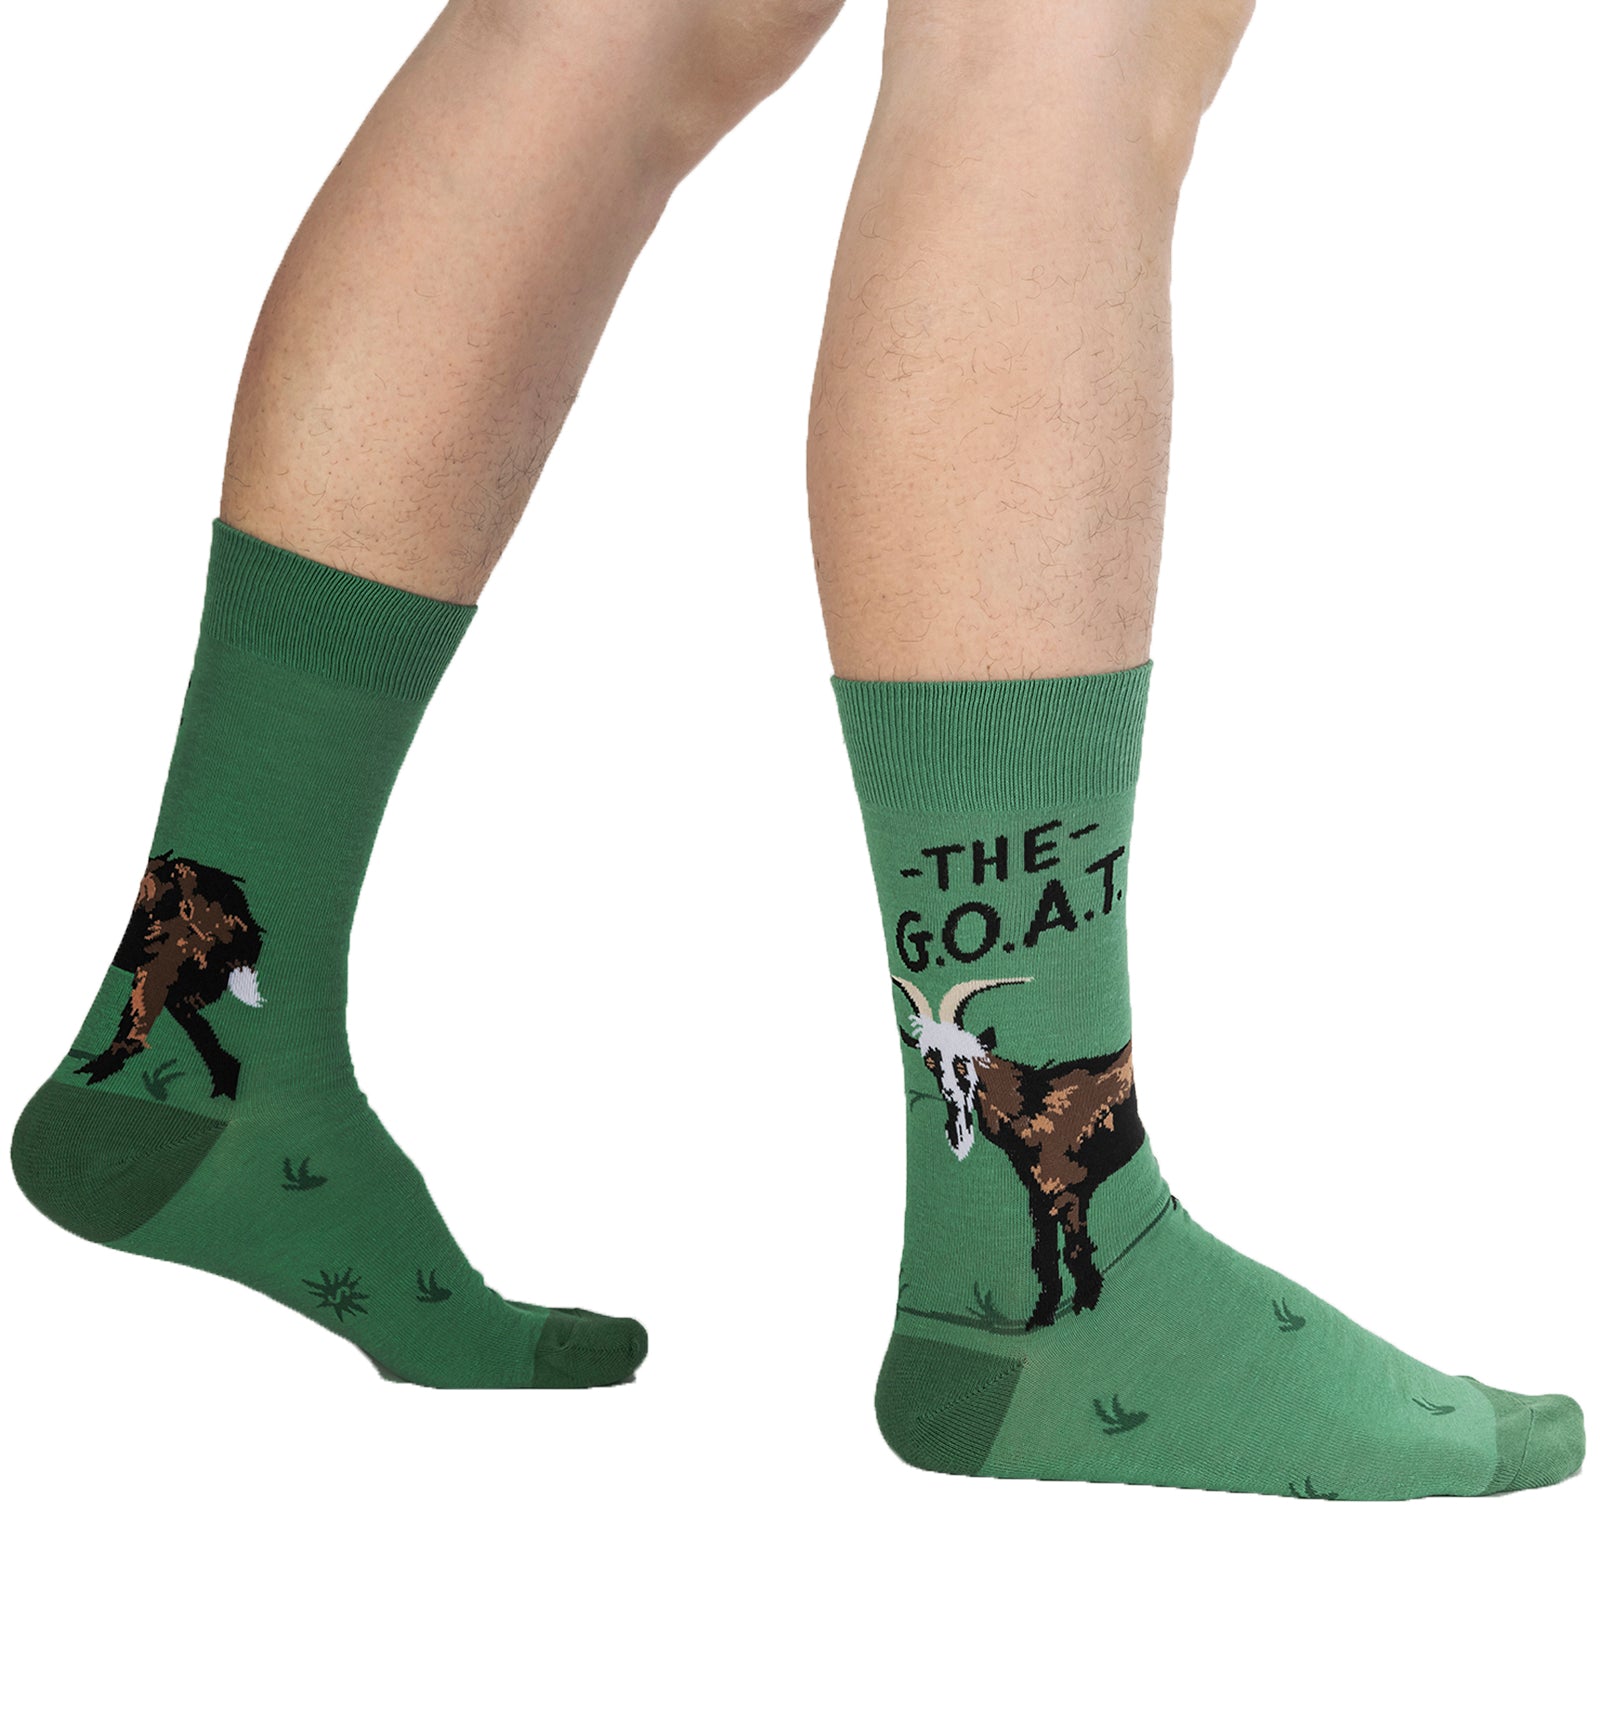 SOCK it to me Men's Crew Socks (MEF0629),The G.O.A.T. - The G.O.A.T.,One Size